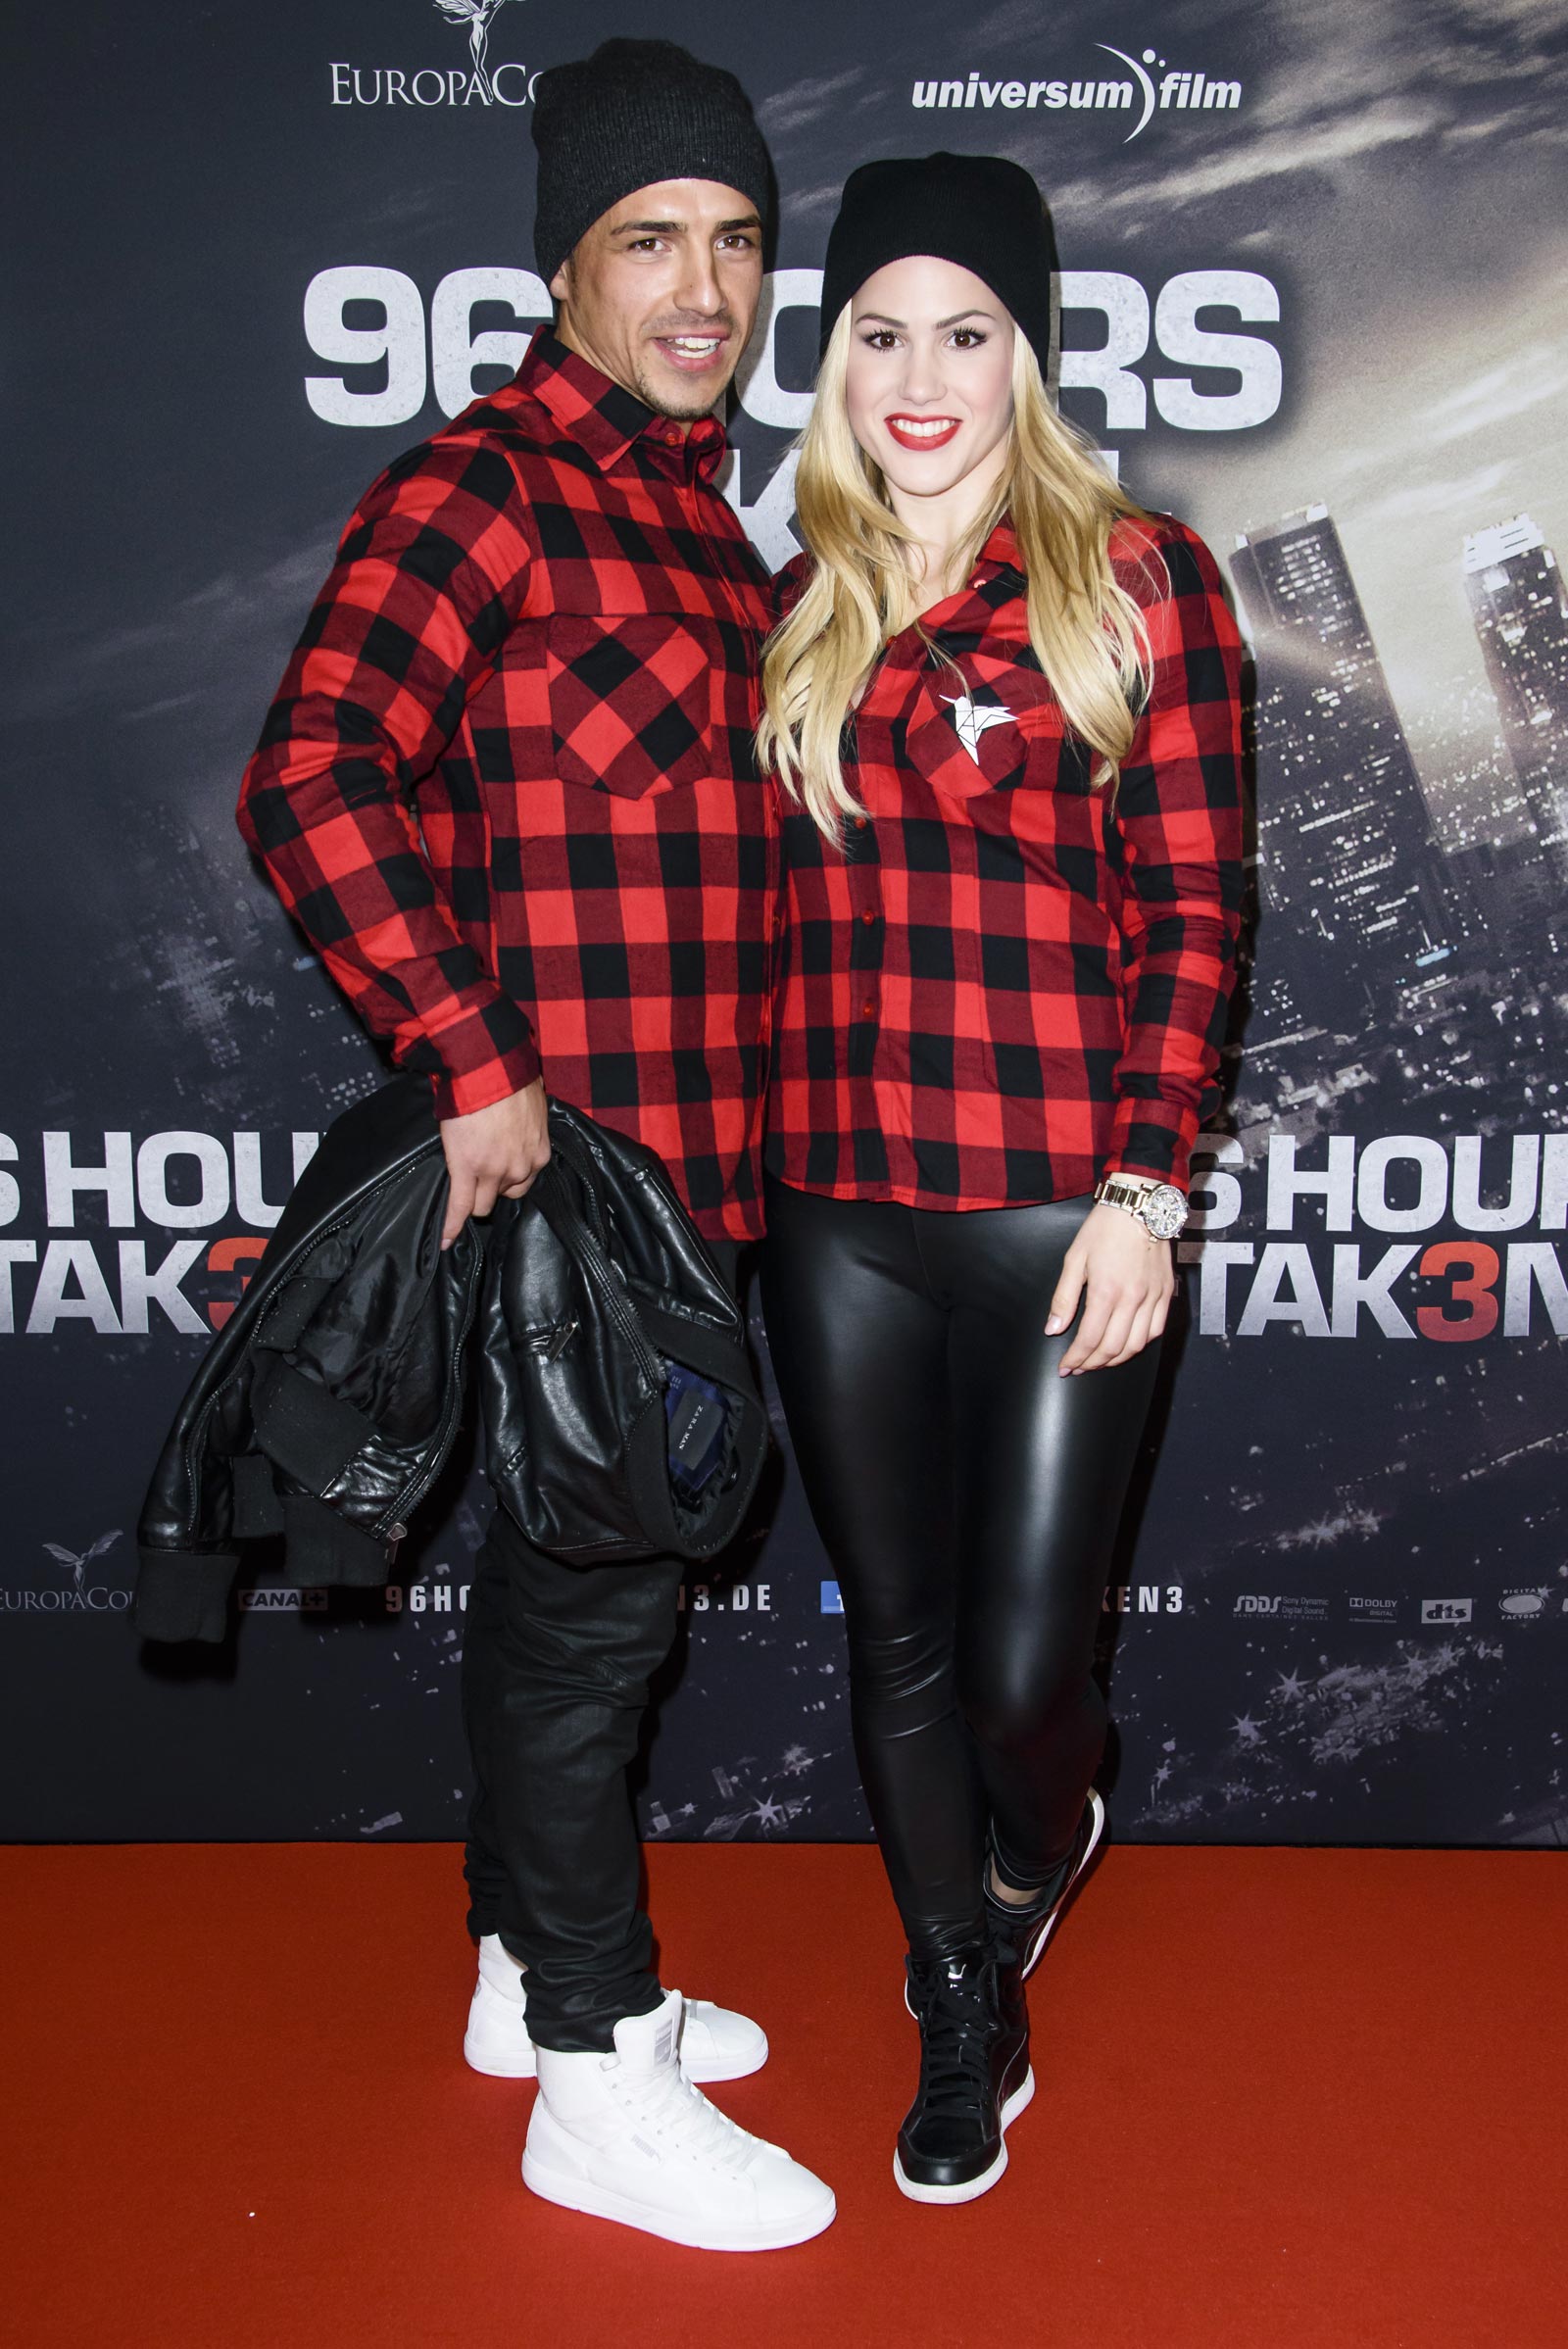 Angelina Heger attends the premiere 96 Hours - Taken 3